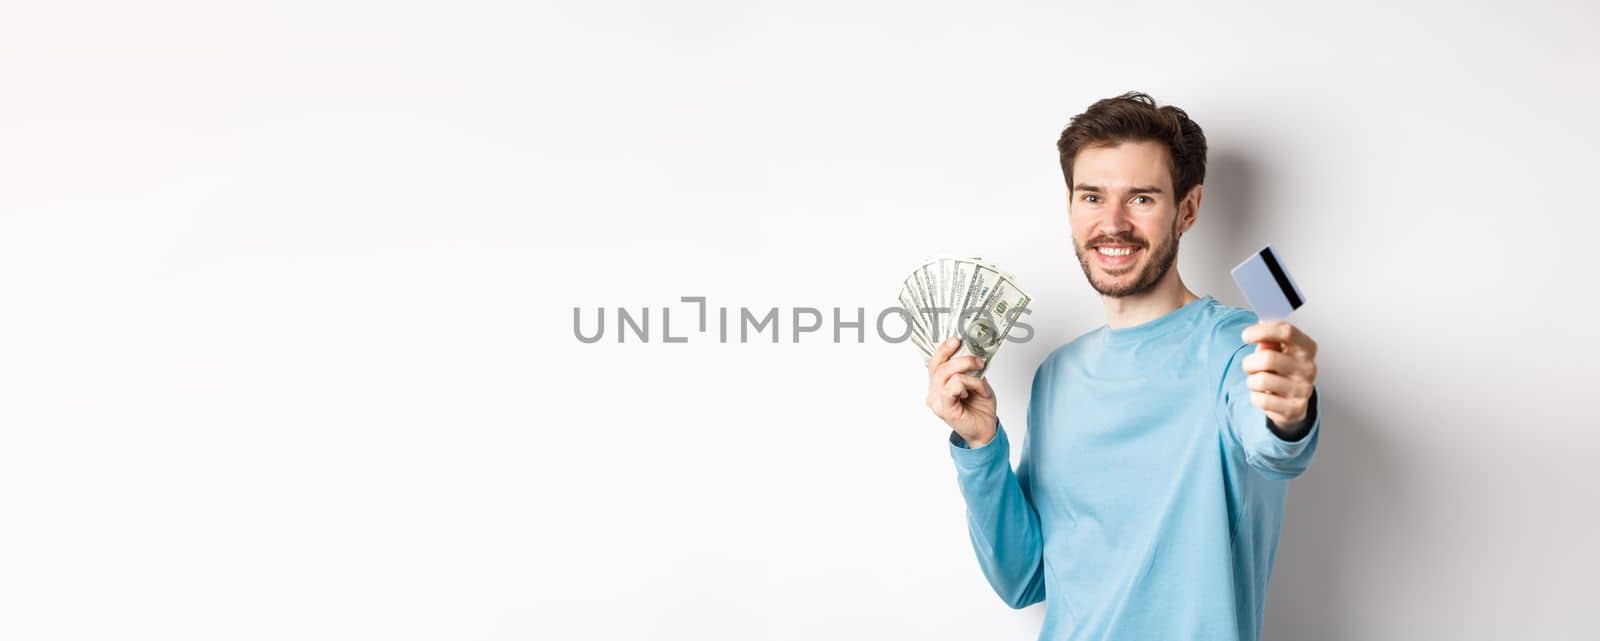 Smiling caucasian man holding money and giving you plastic credit card, standing on white background.